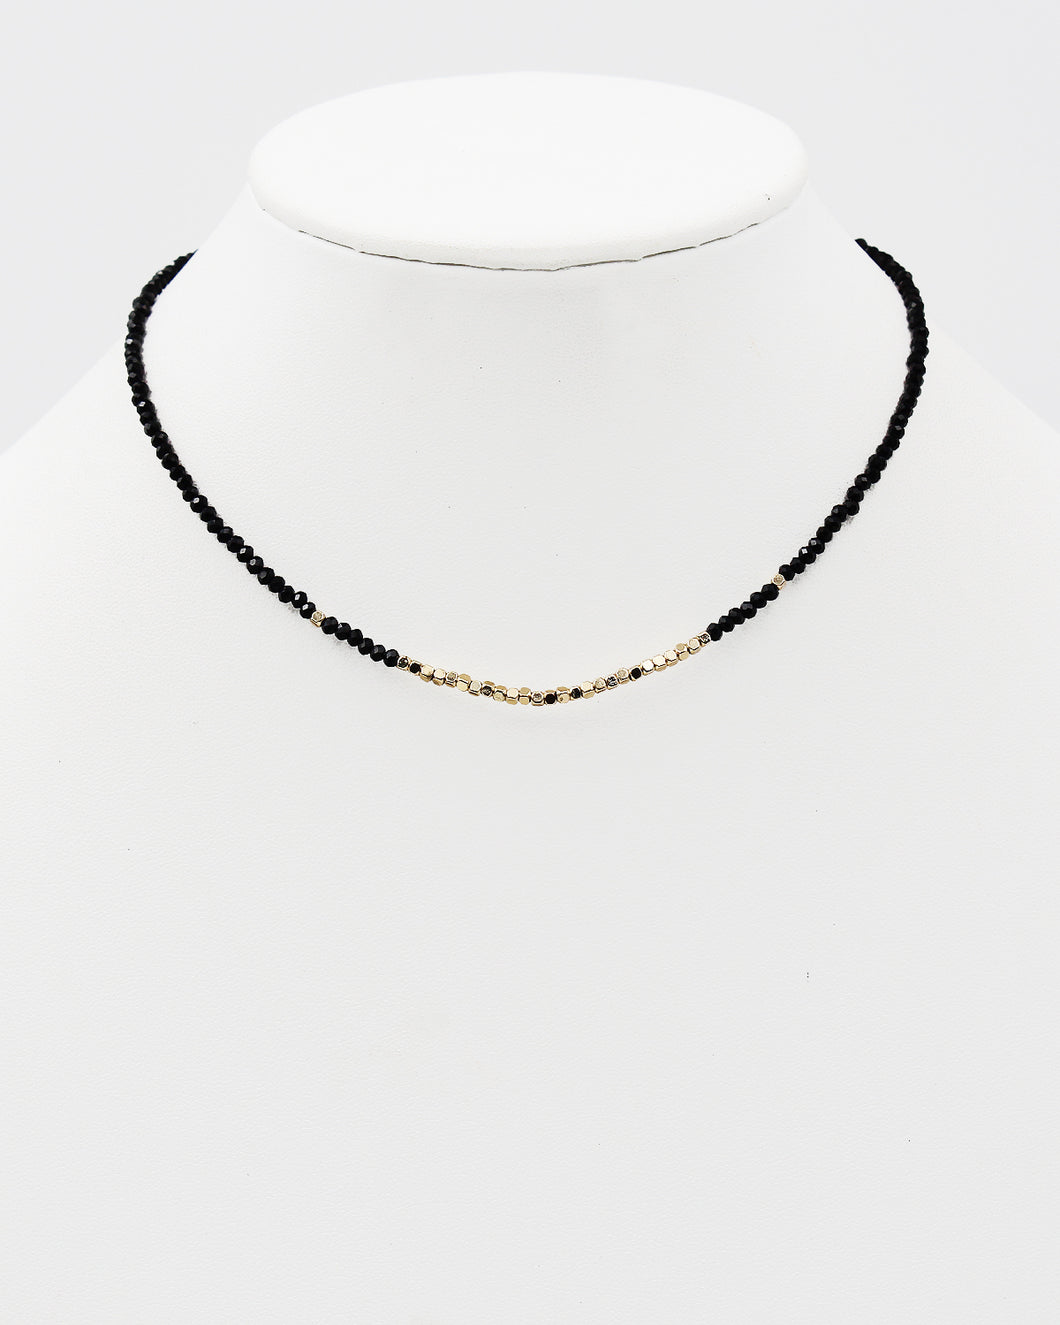 Faceted Crystal Beaded Choker with Gold Tone Metal Beads